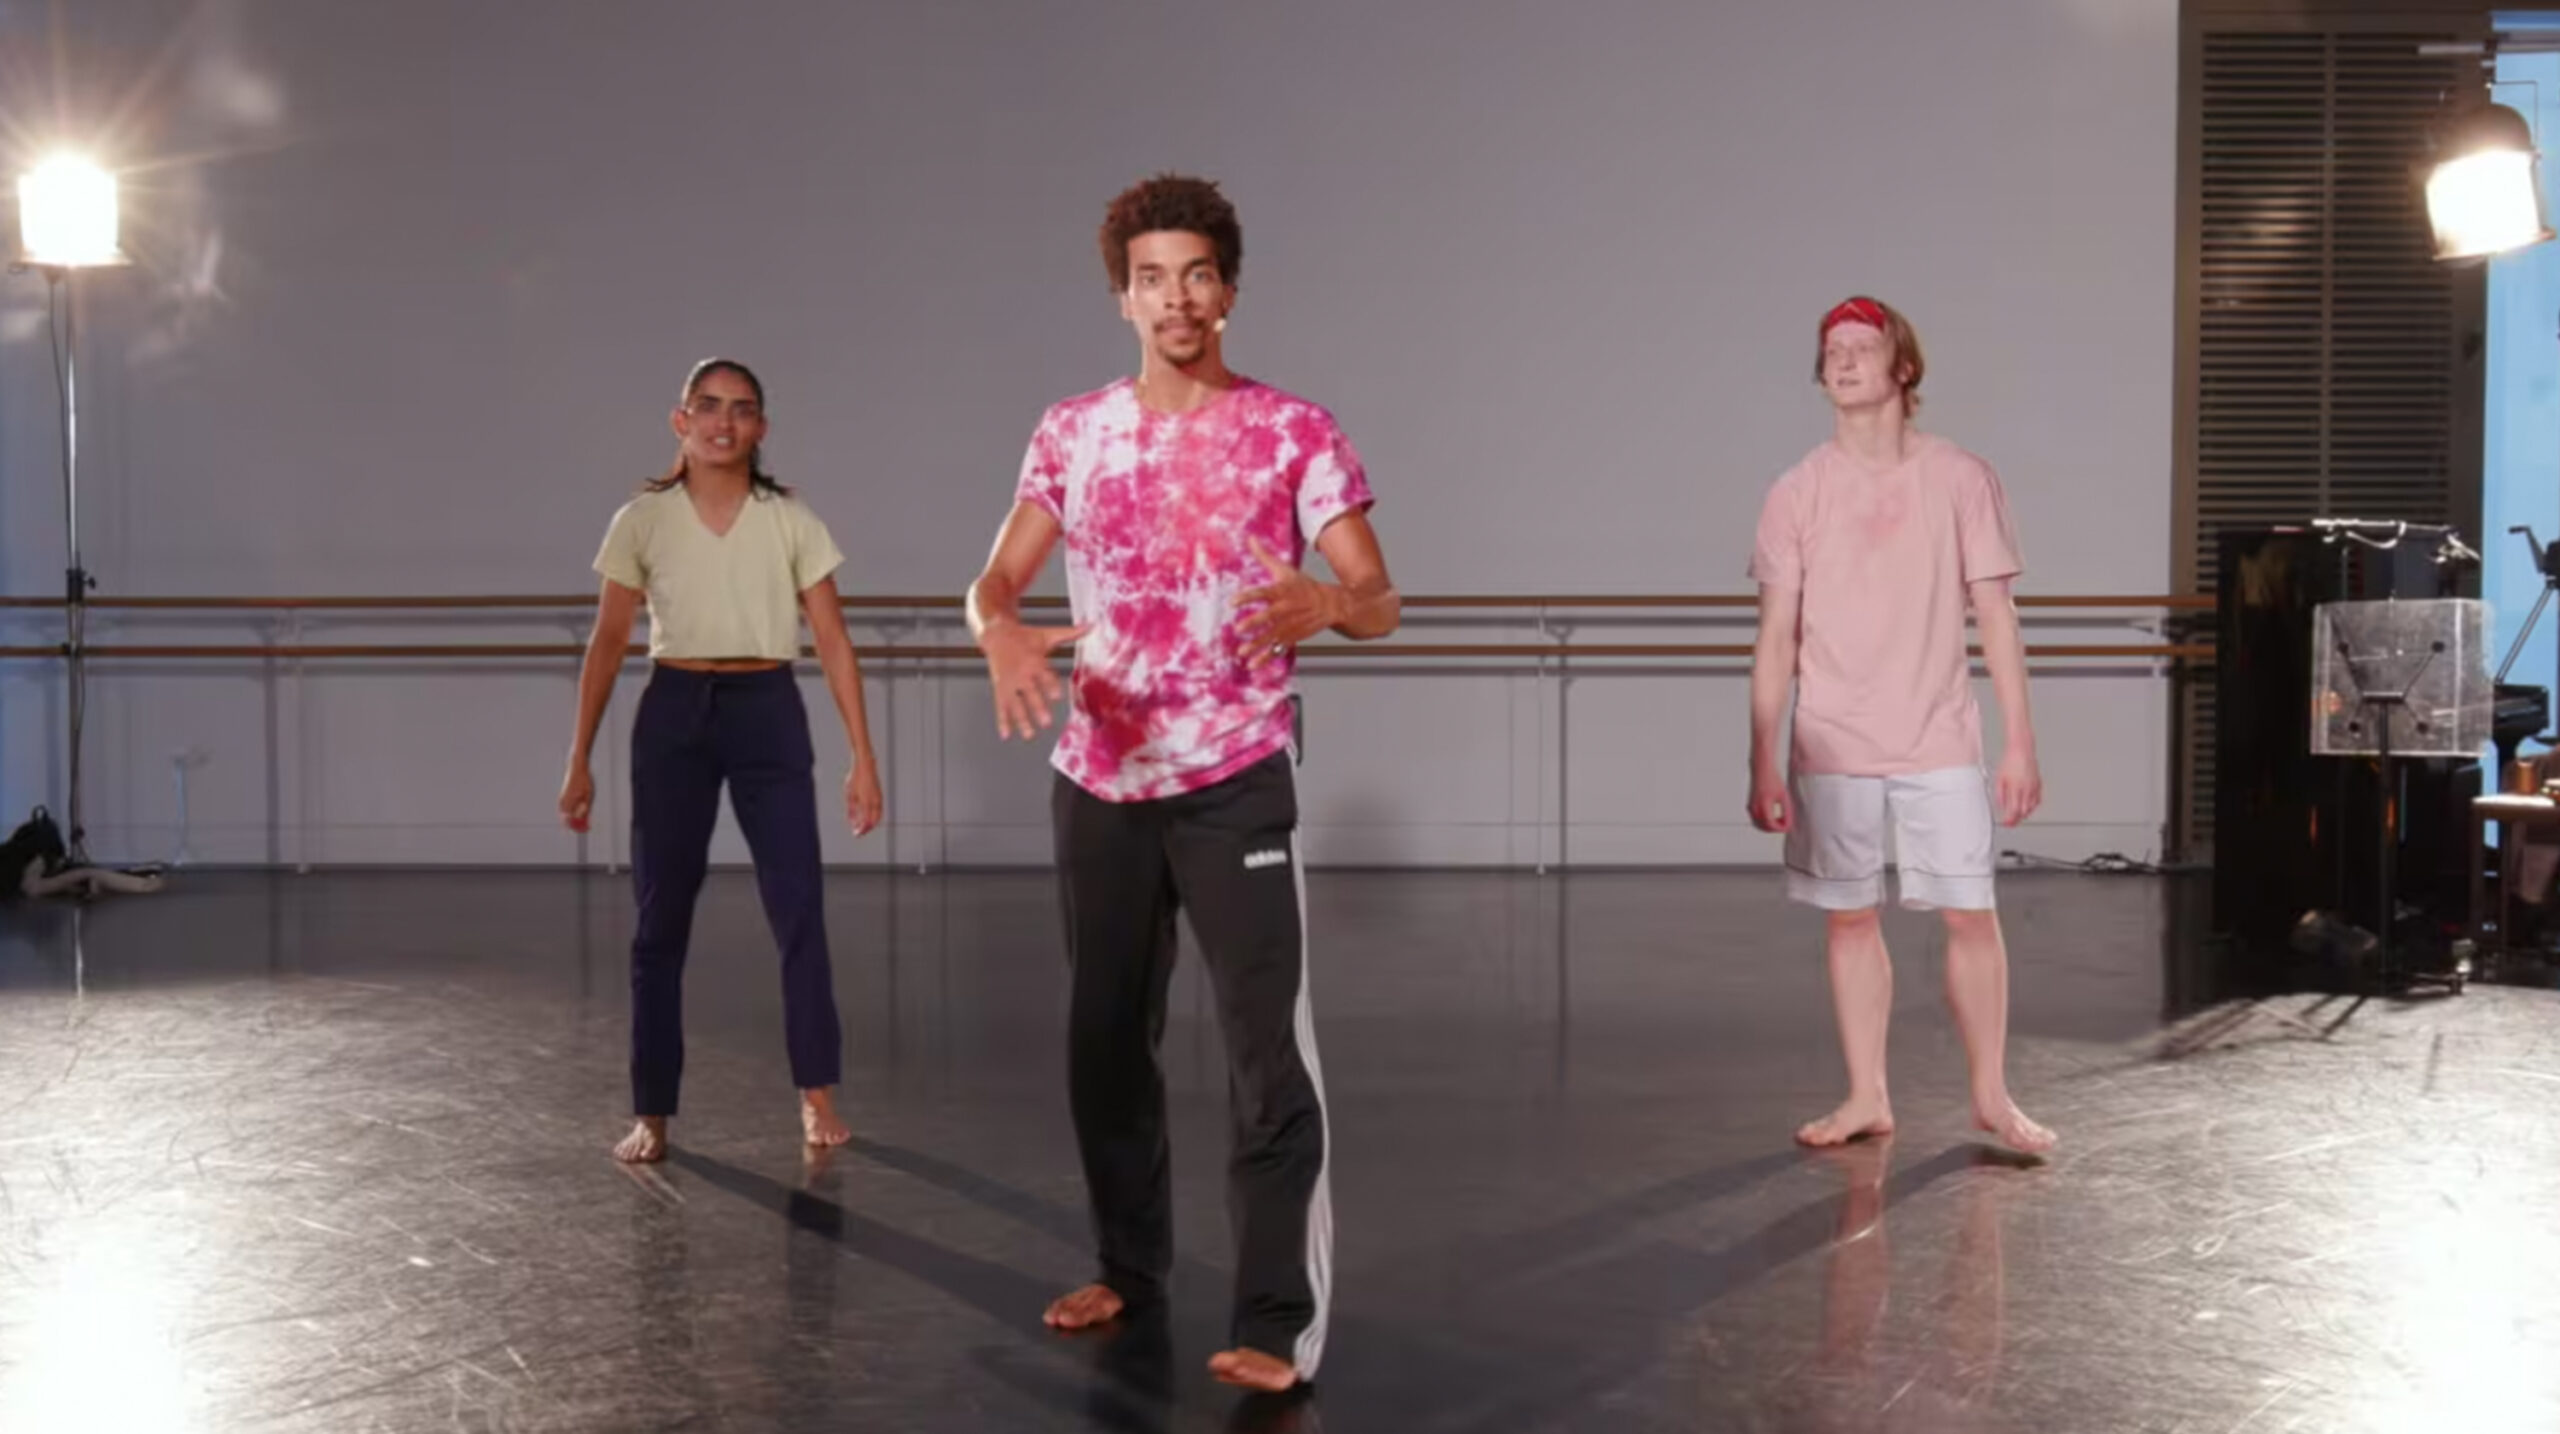 Teacher with a pink and white shirt with two other dancers behind him inside a studio